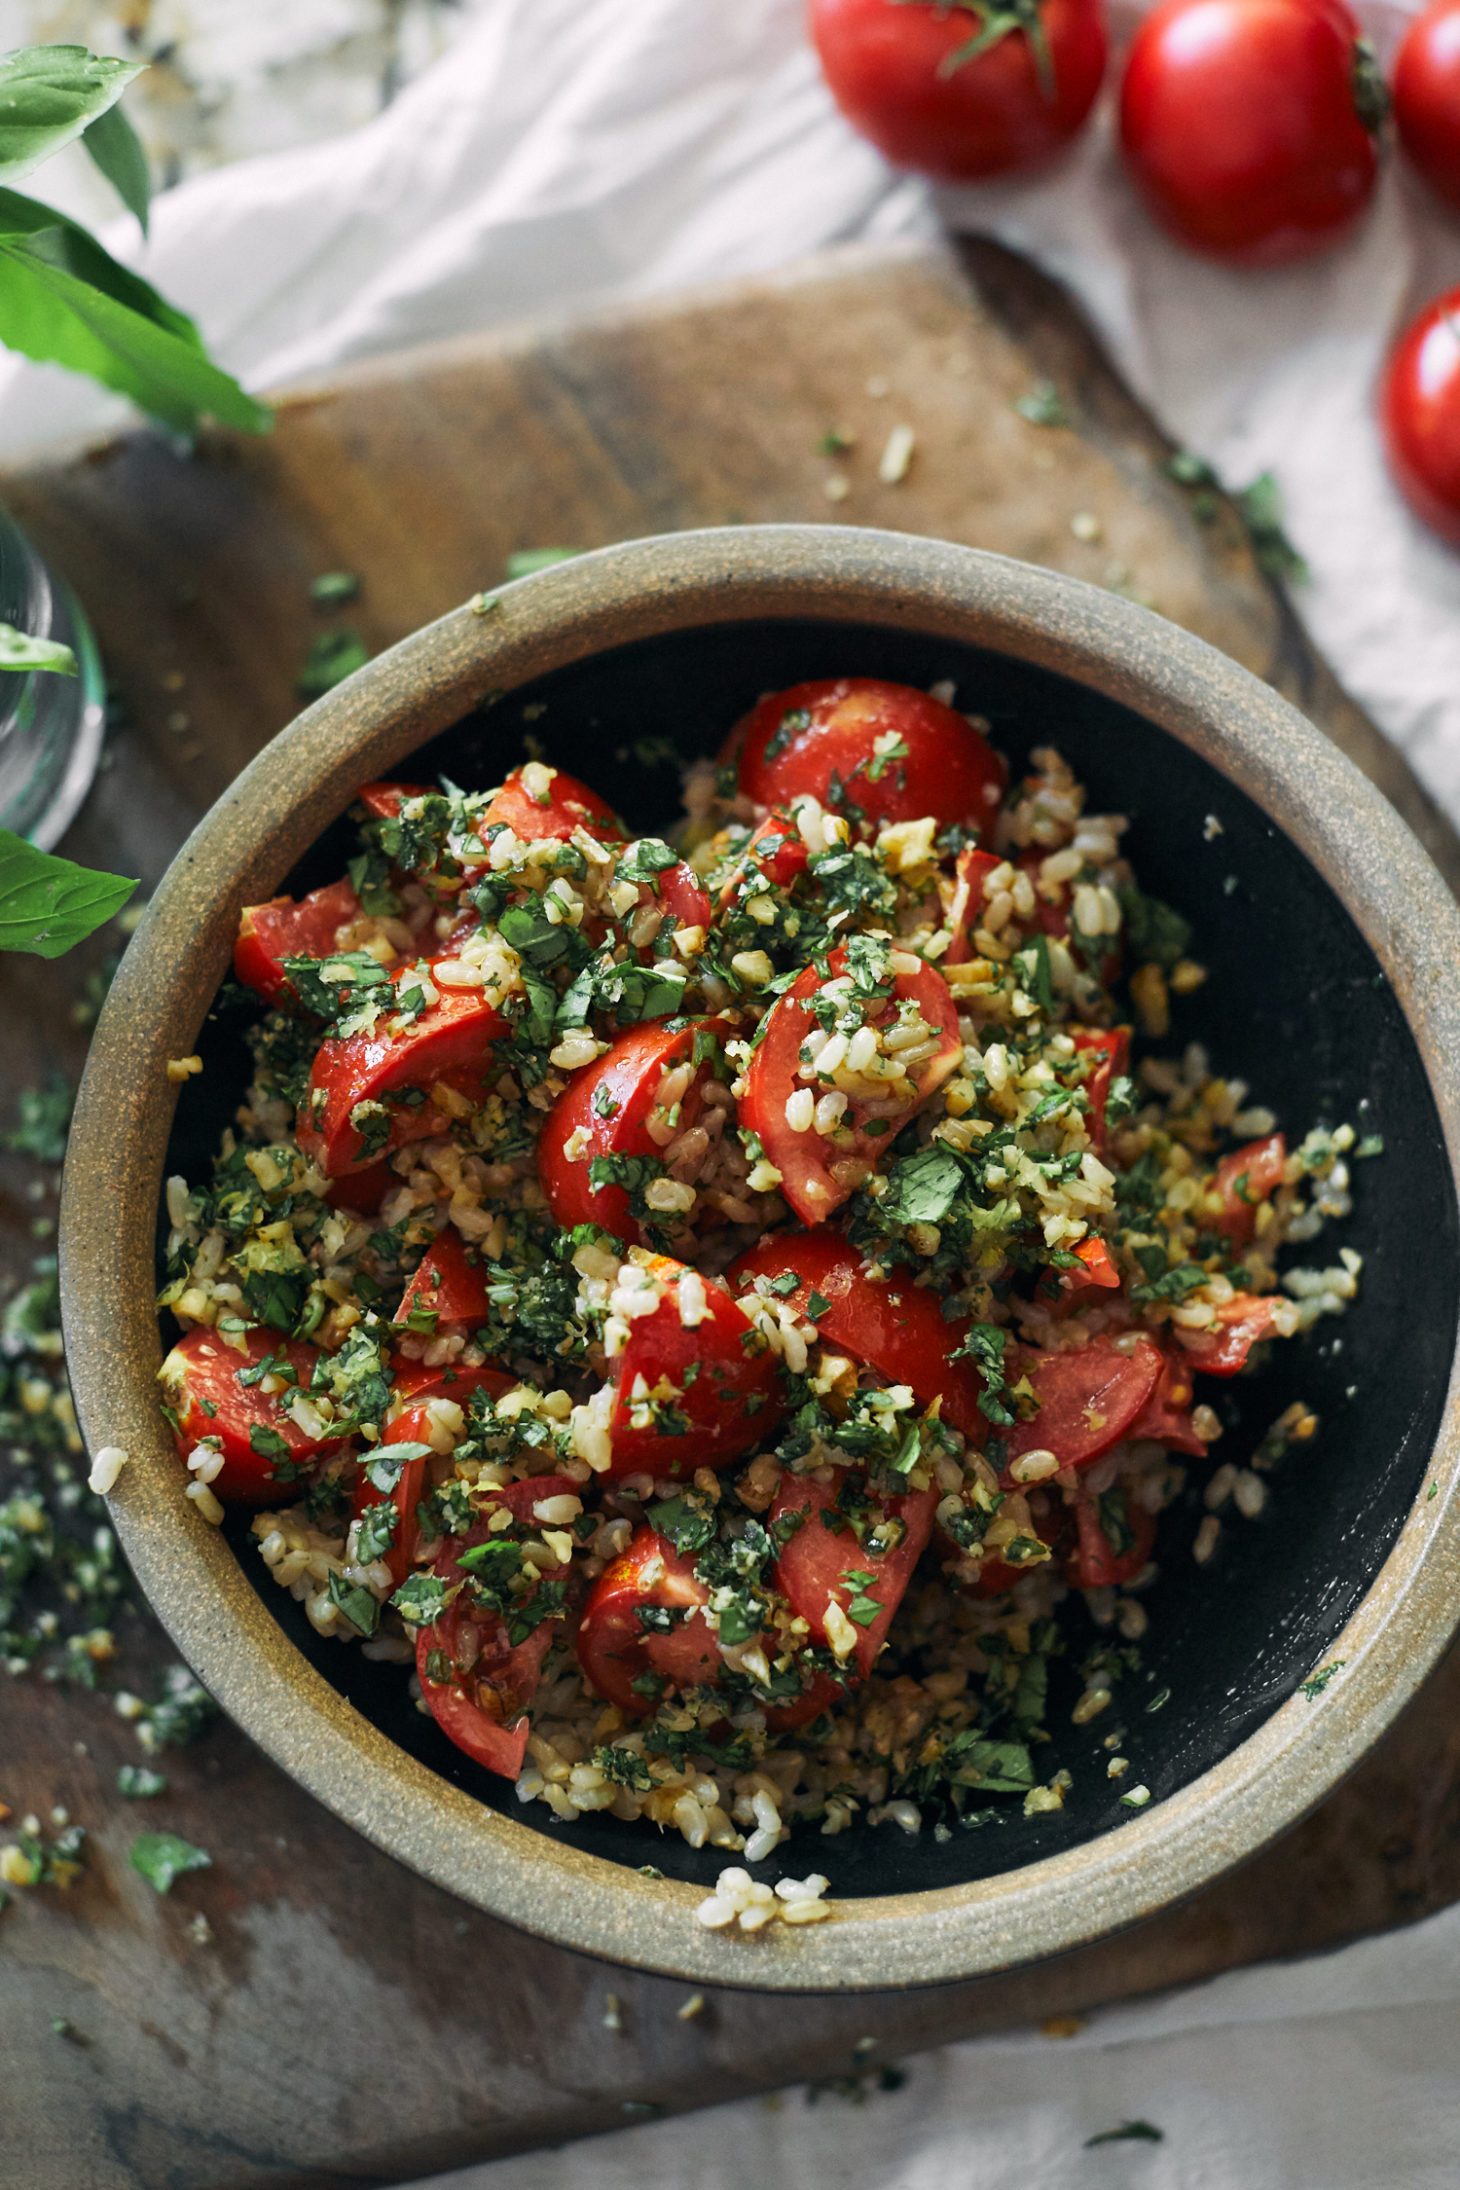 Tomatoes tossed with rice, herbs, walnuts, and chickpeas